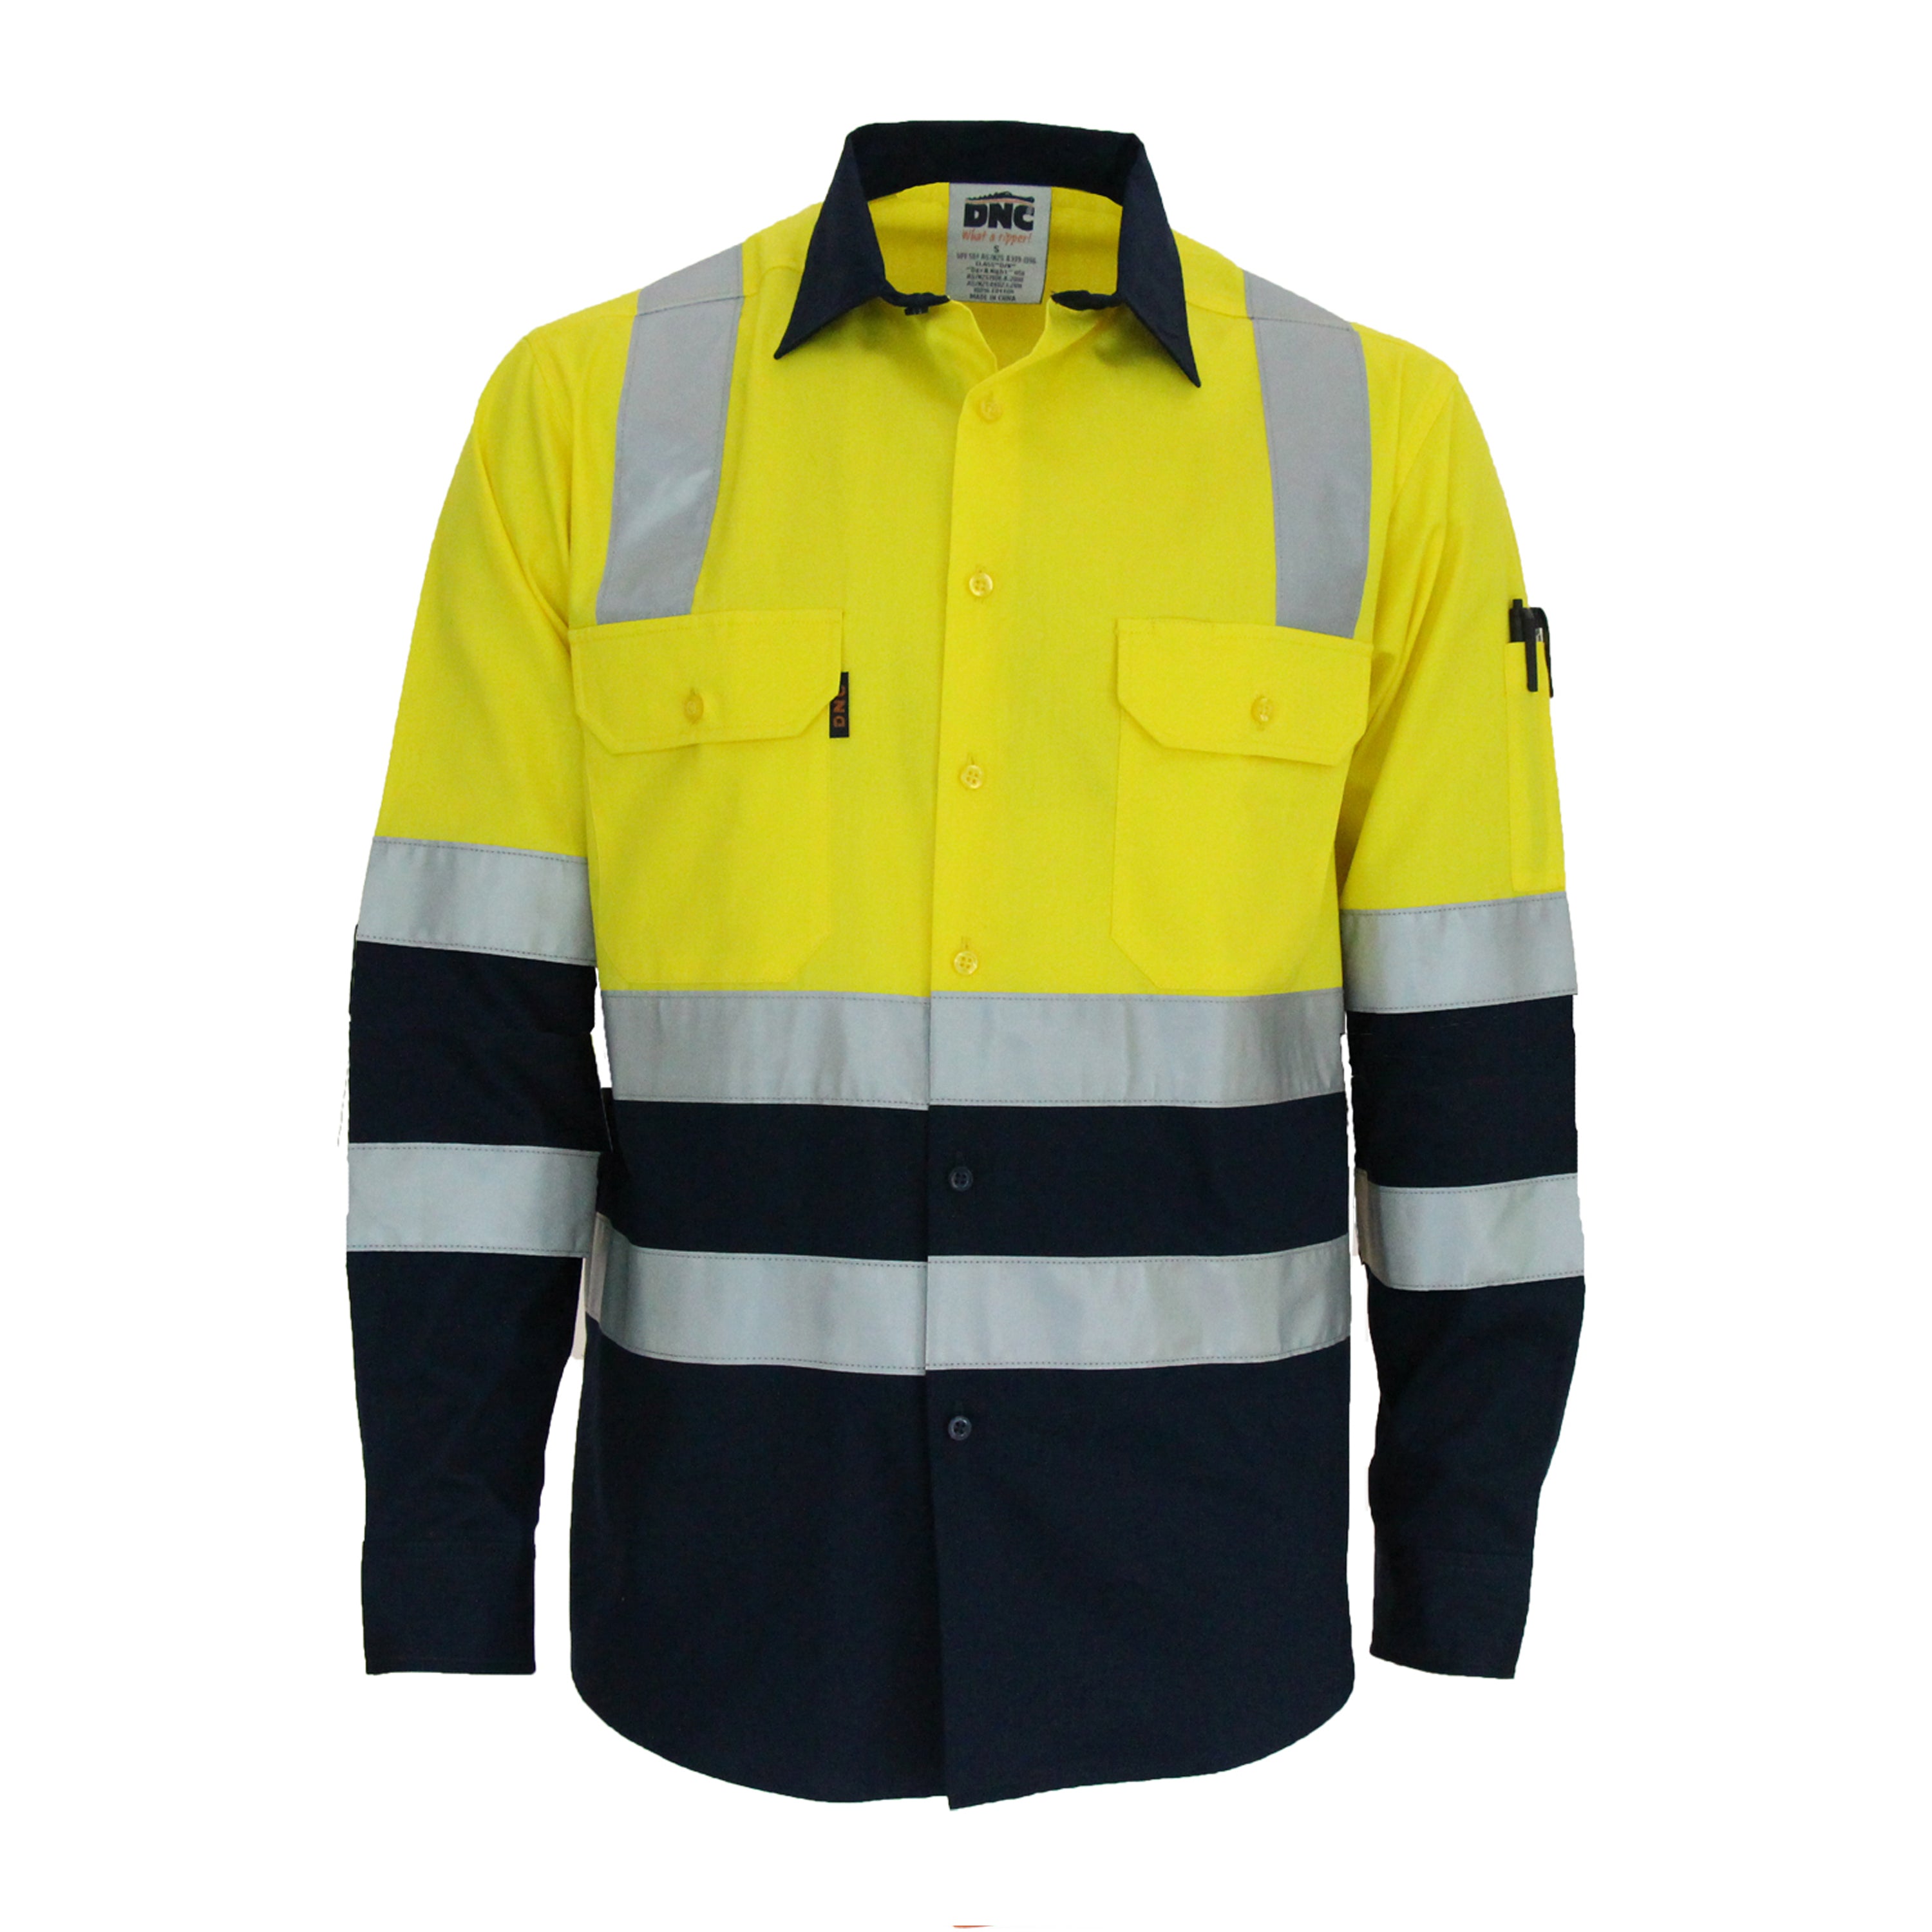 Hivis 2 Tone L/W Cotton Biomotion Shirt, X Back Shirt with R/Tape